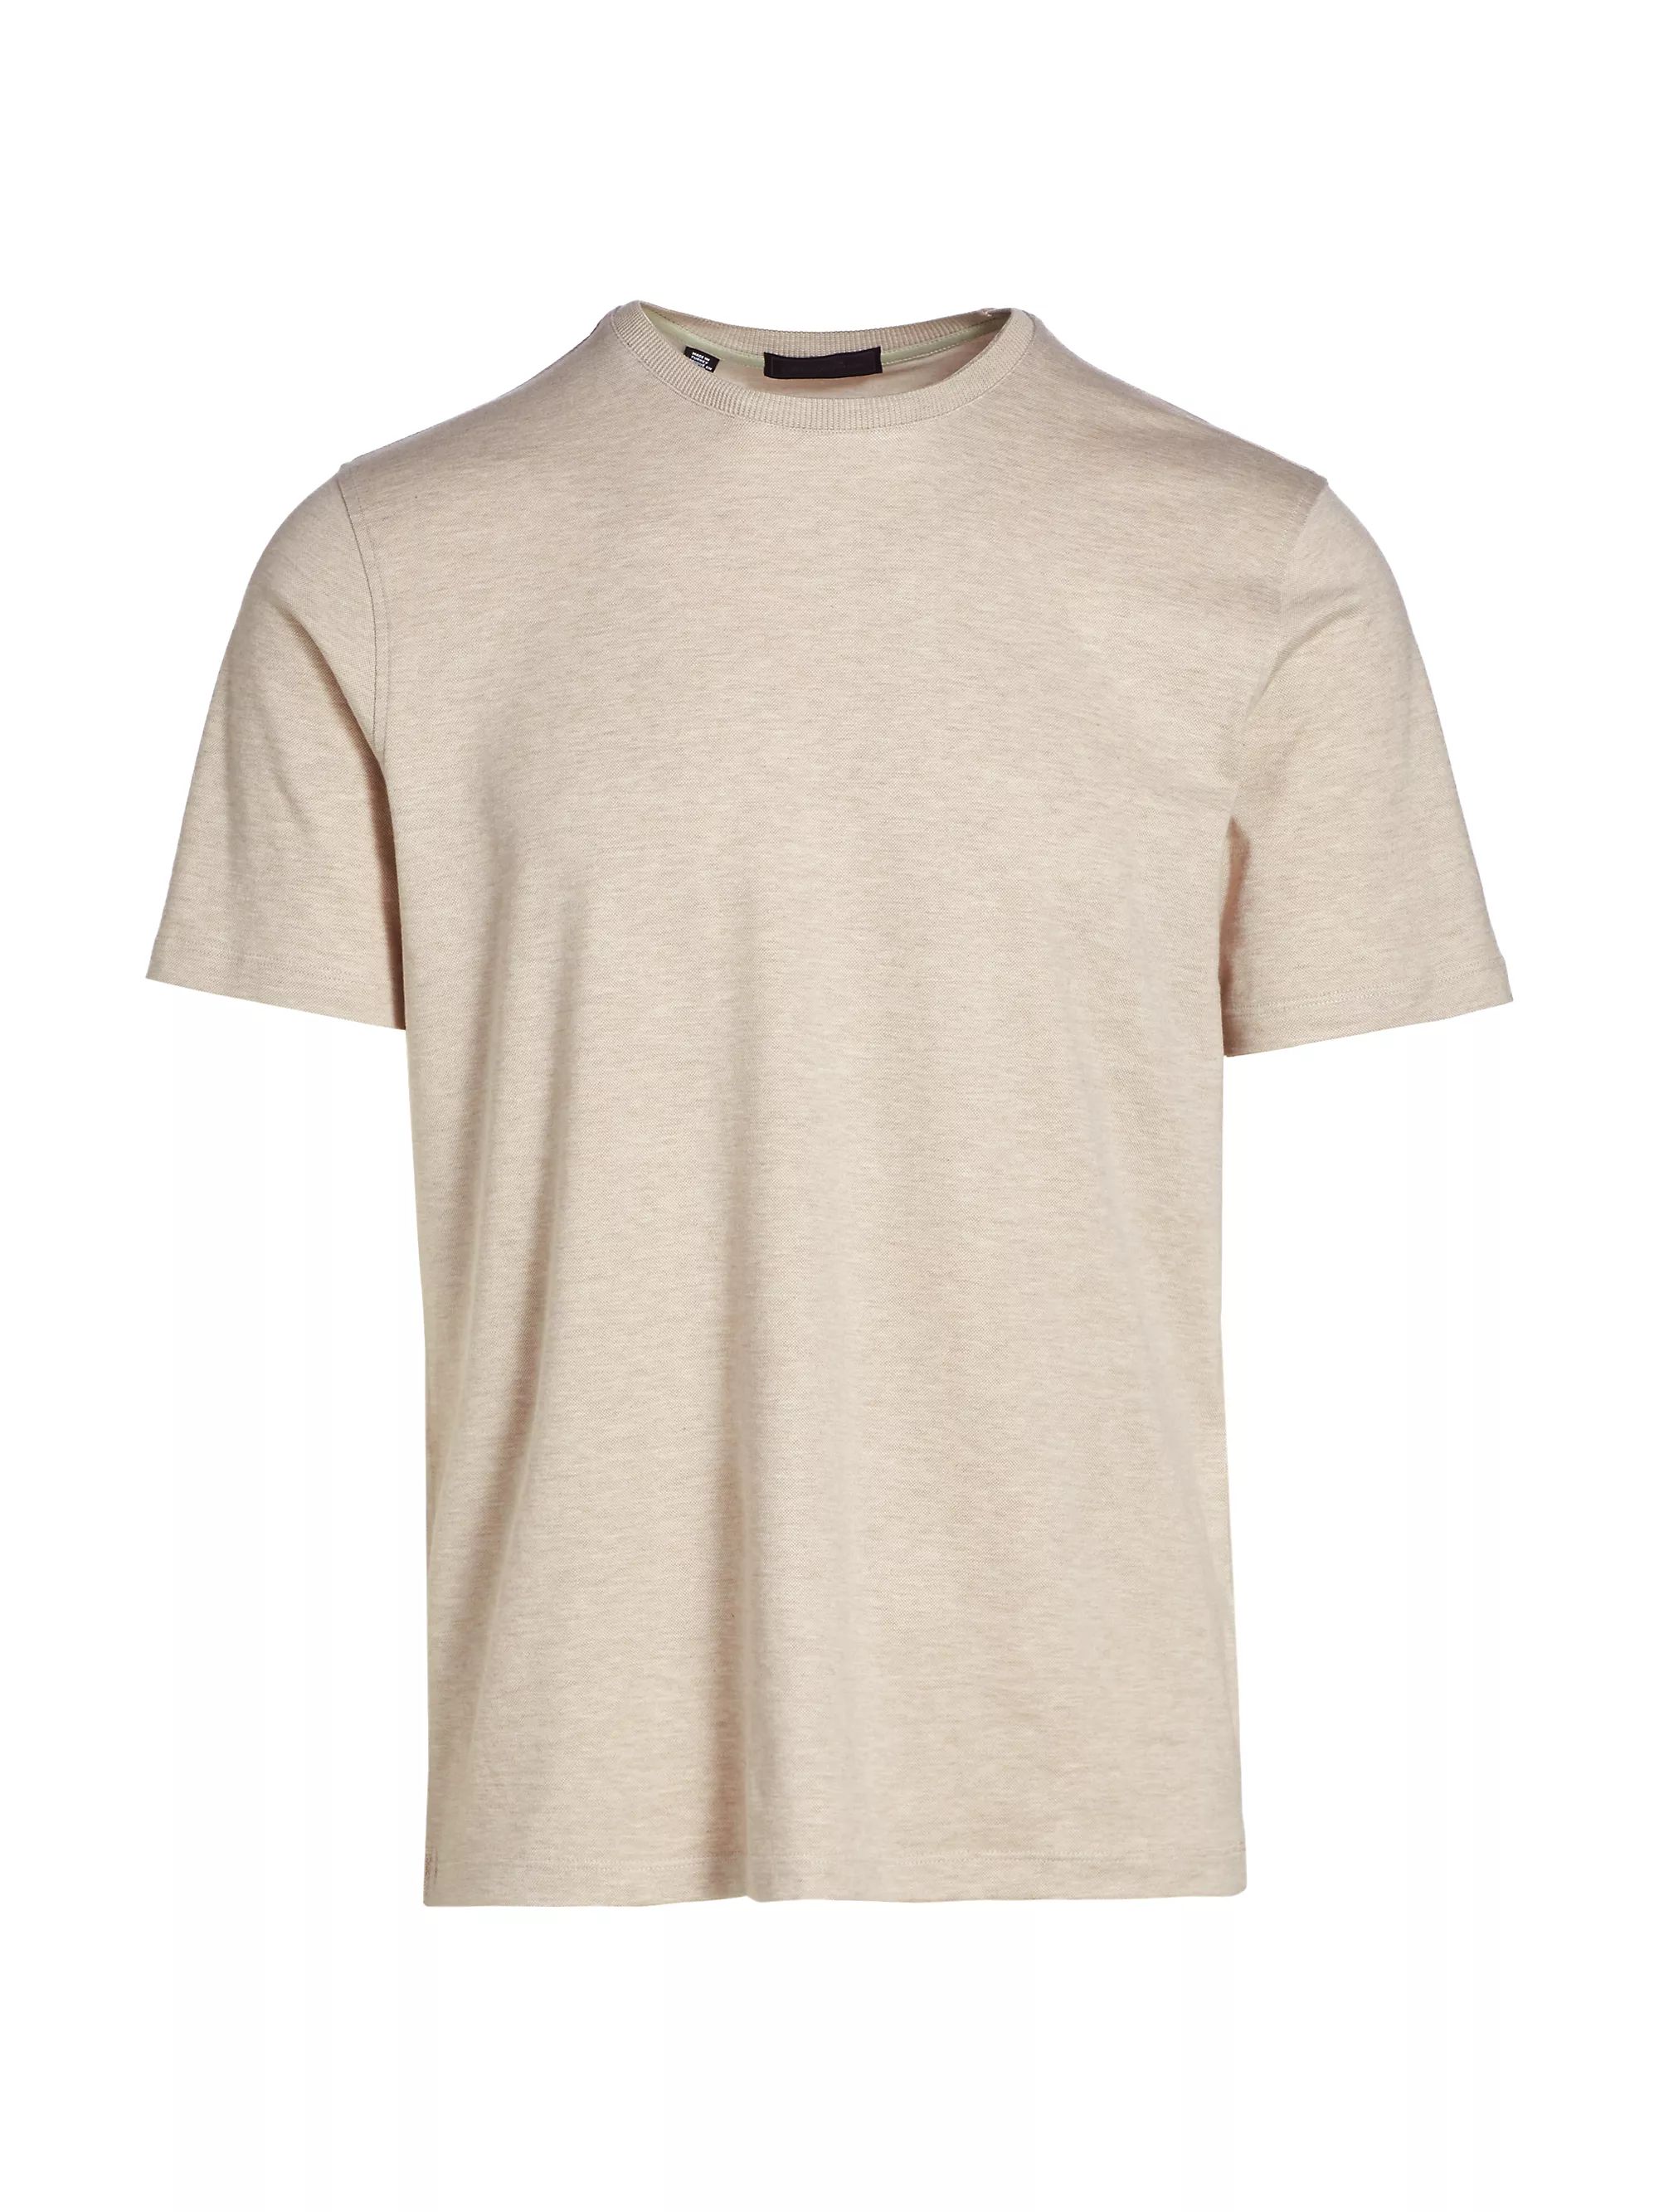 COLLECTION Elevated Crewneck T-Shirt | Saks Fifth Avenue